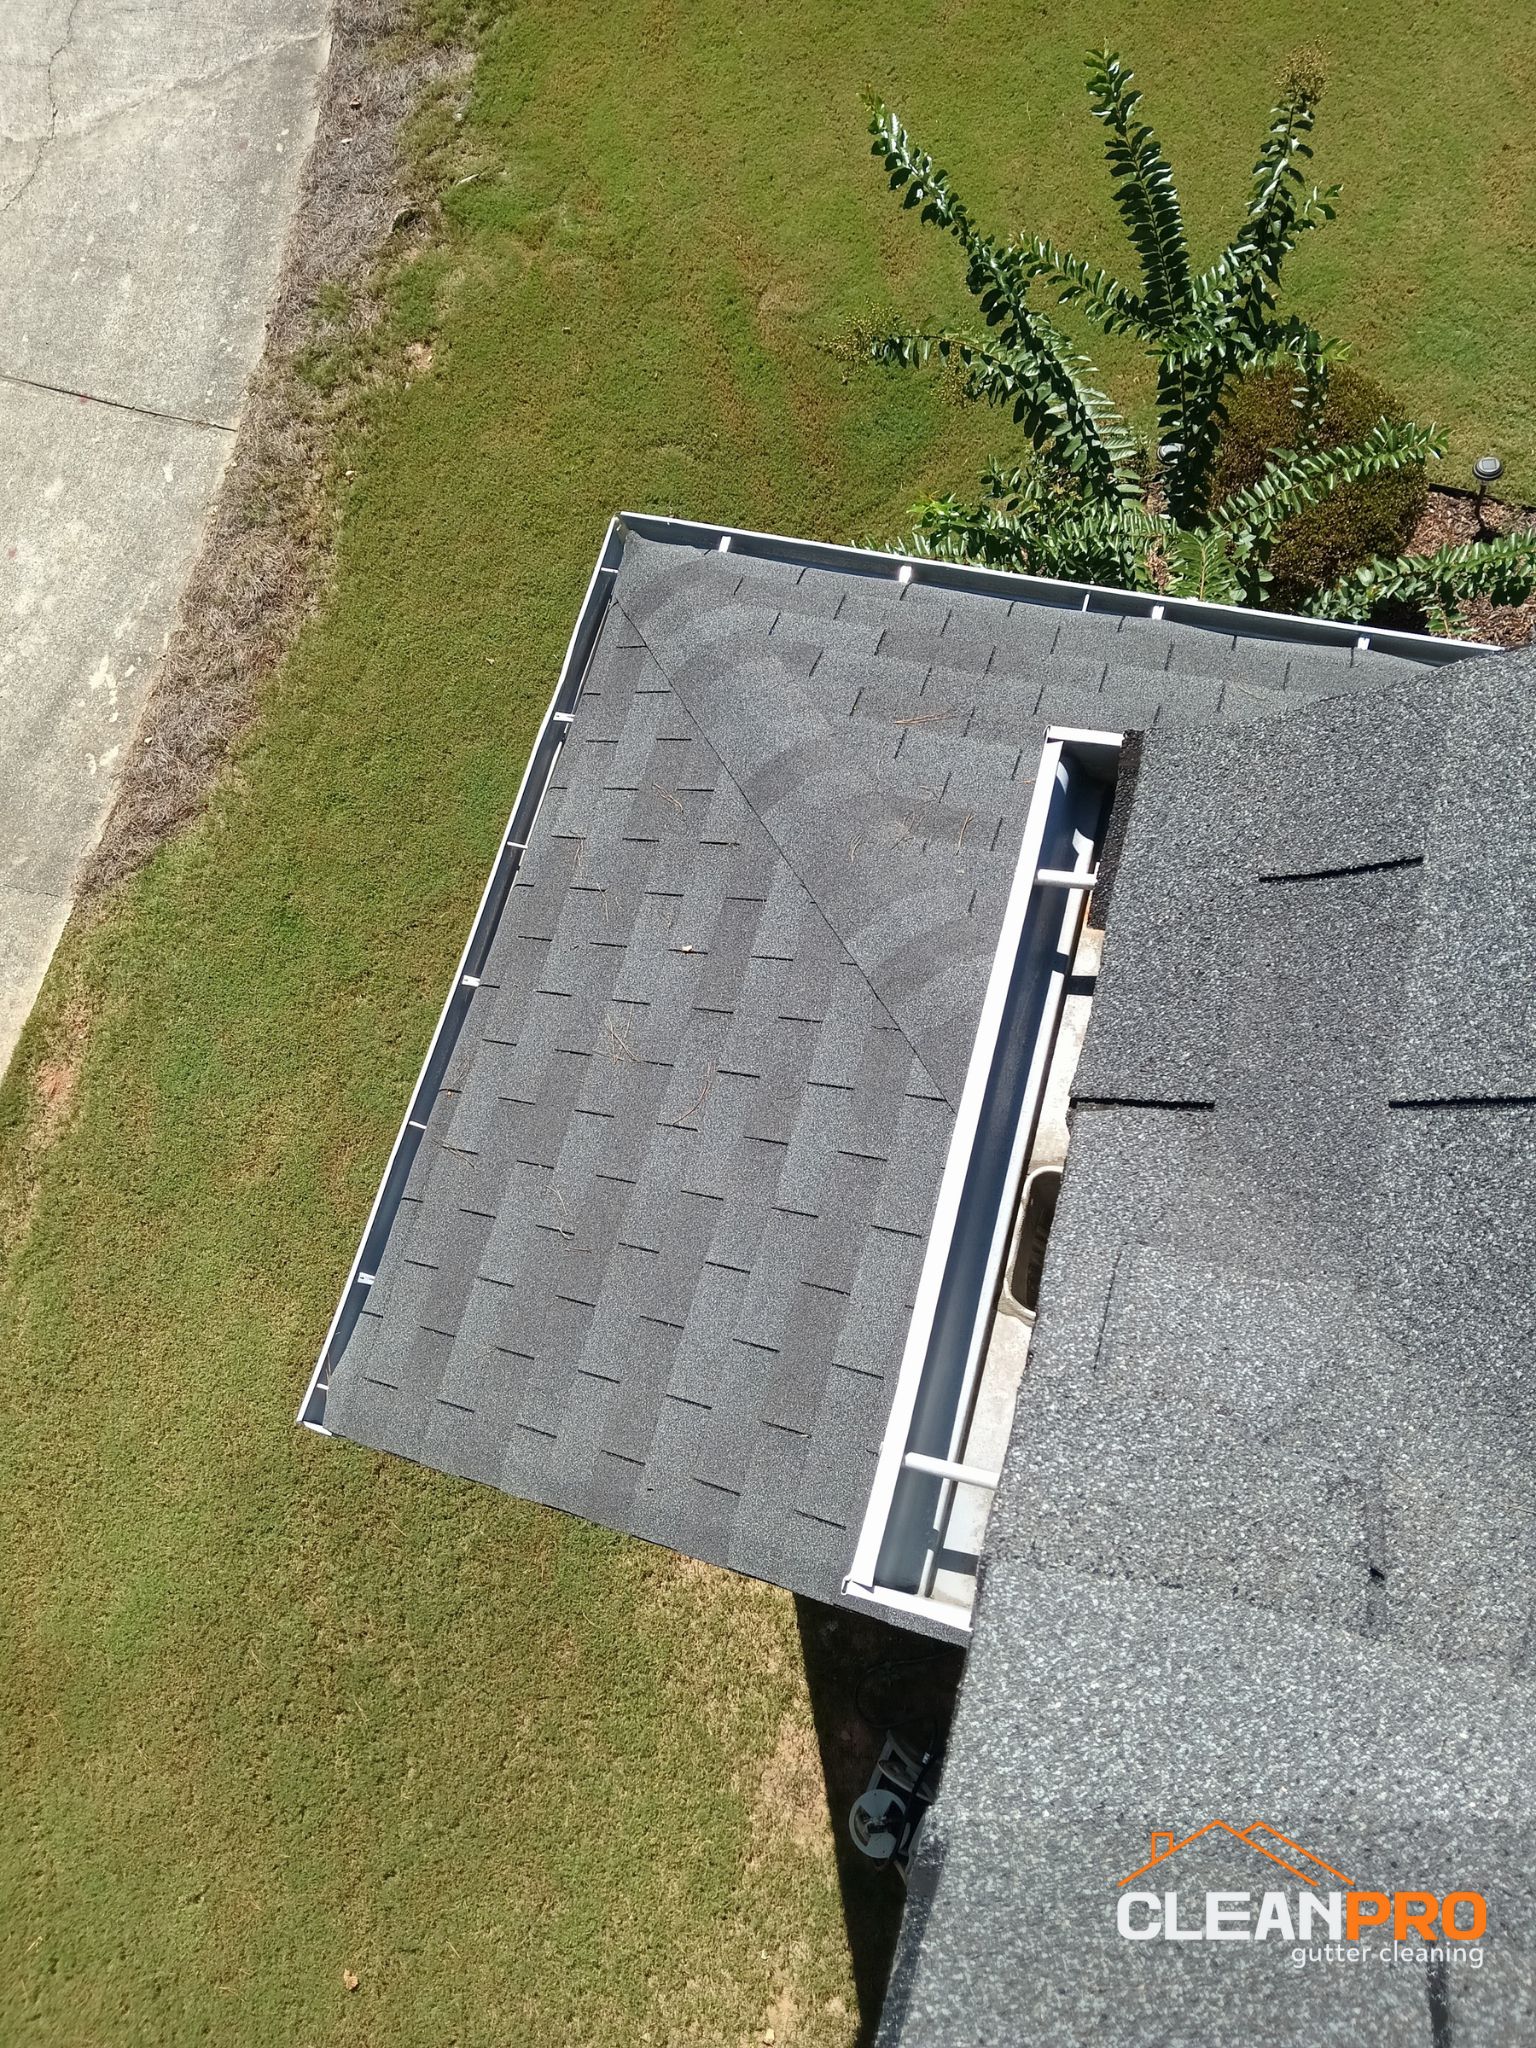 Residential Gutter Cleaning in Kennesaw GA